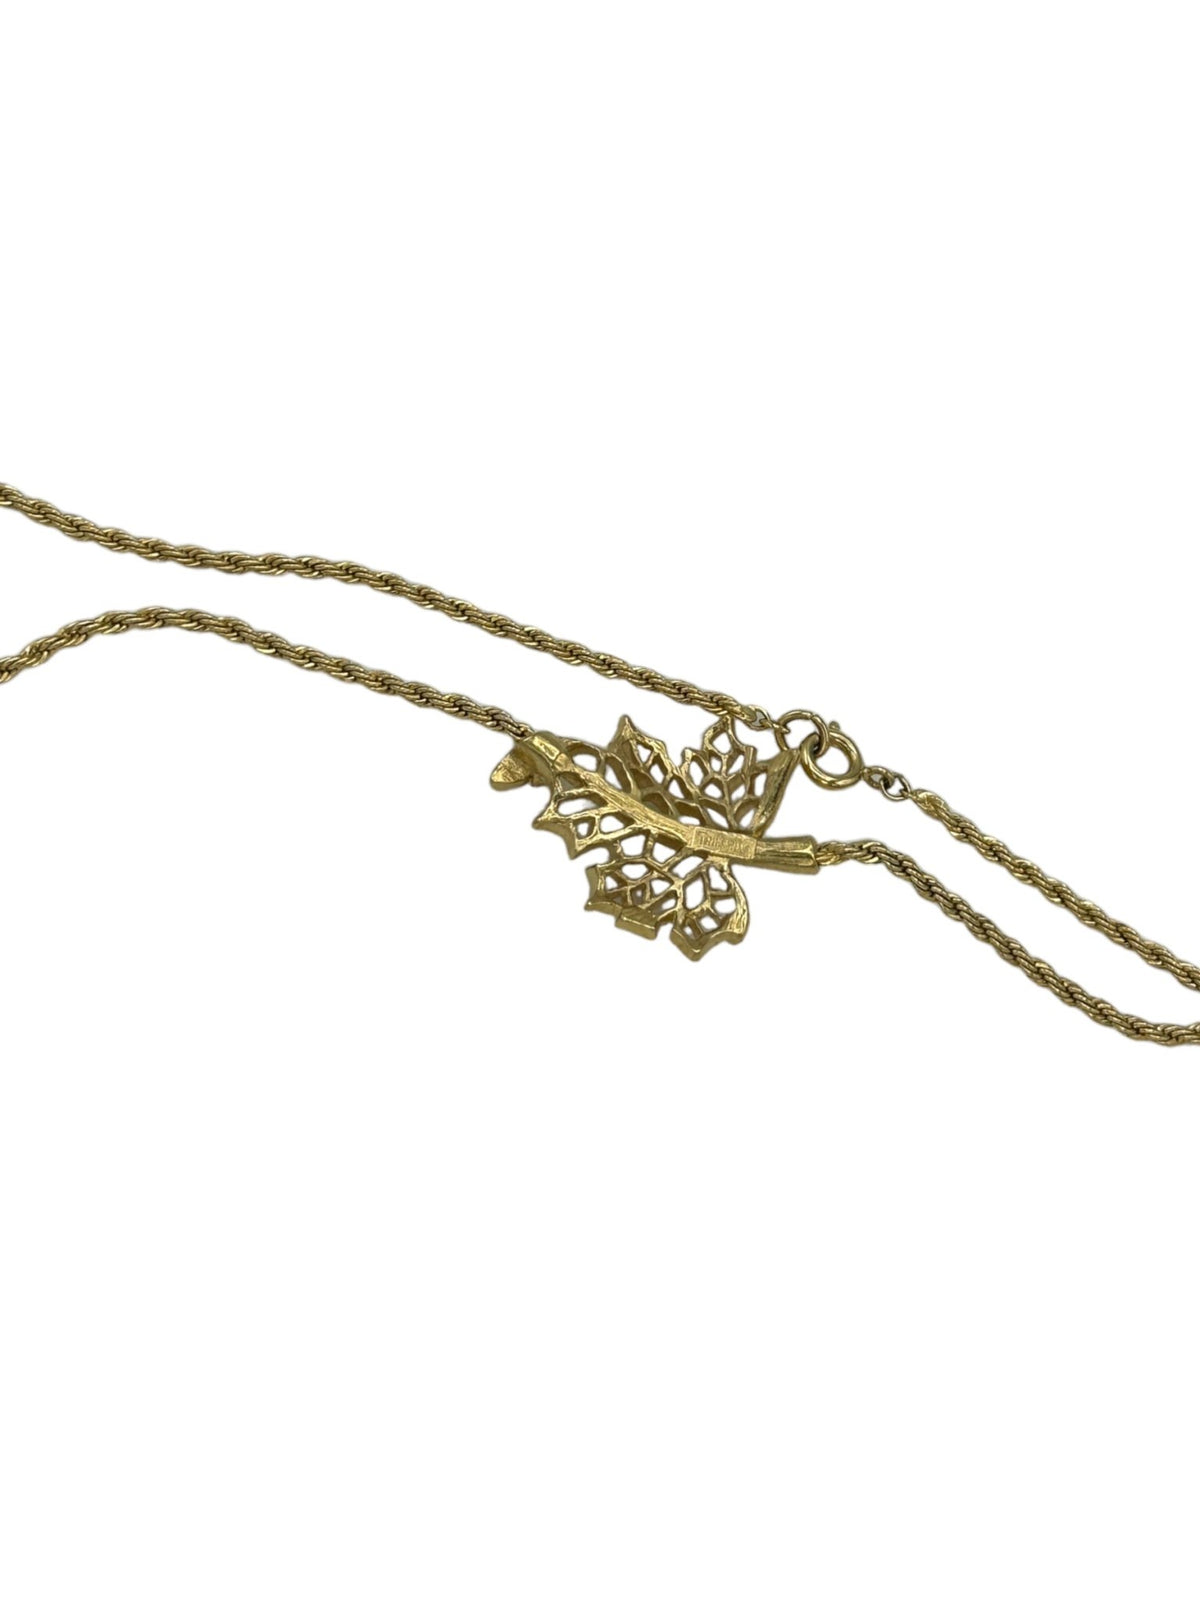 Trifari Gold Open Leaf Pendant Rope Chain - 24 Wishes Vintage Jewelry